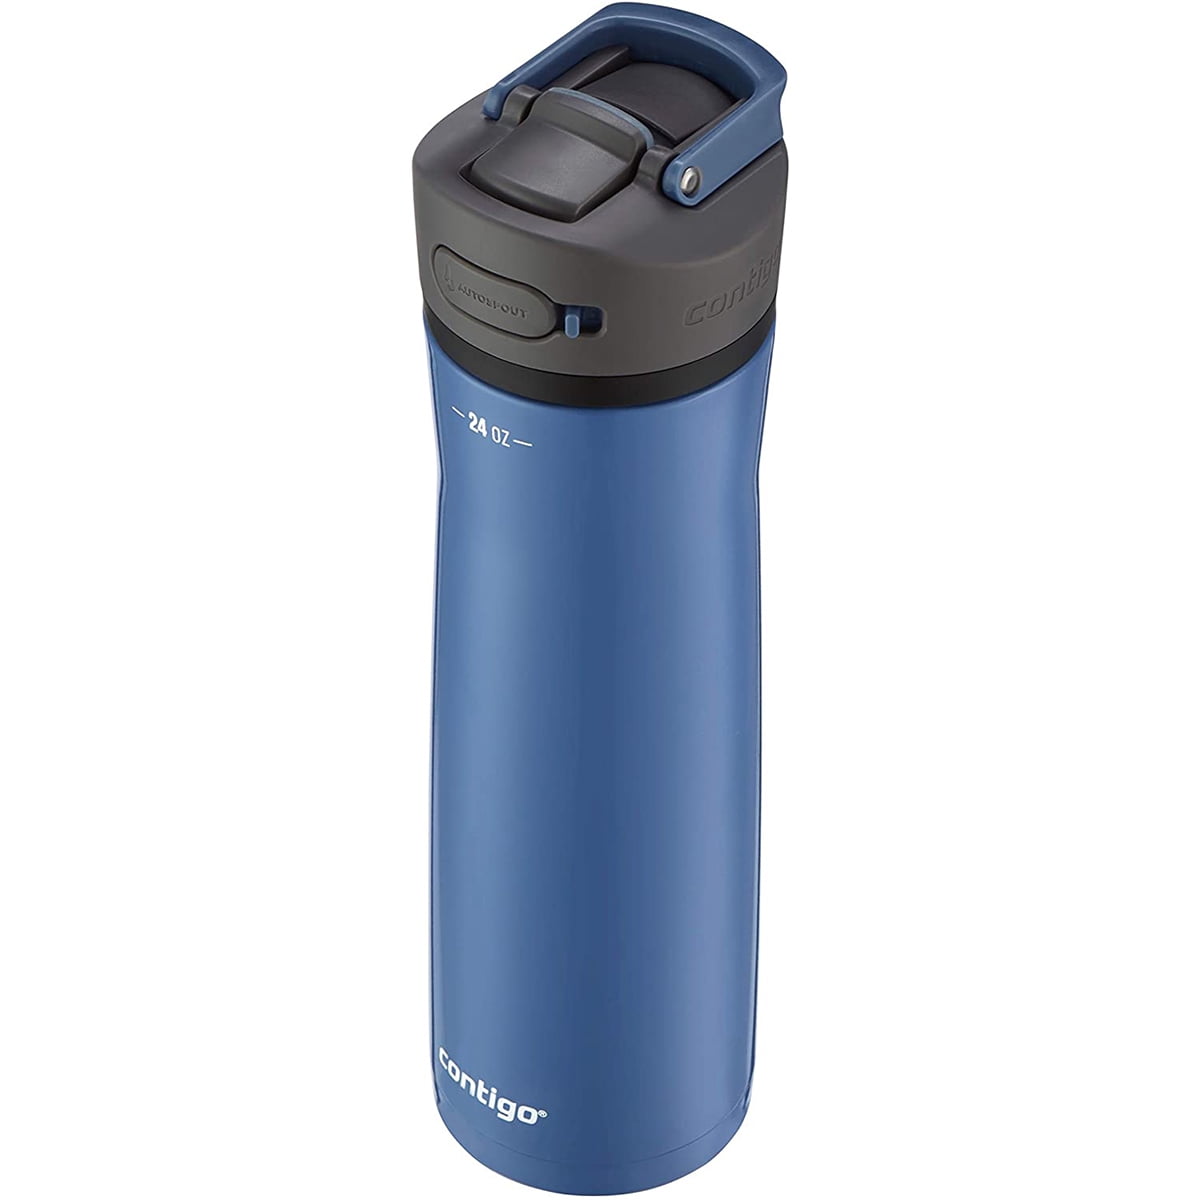 Contigo Ashland Chill 2.0 Stainless Steel Water Bottle with AUTOSPOUT Lid,  Blue, 24 fl oz.